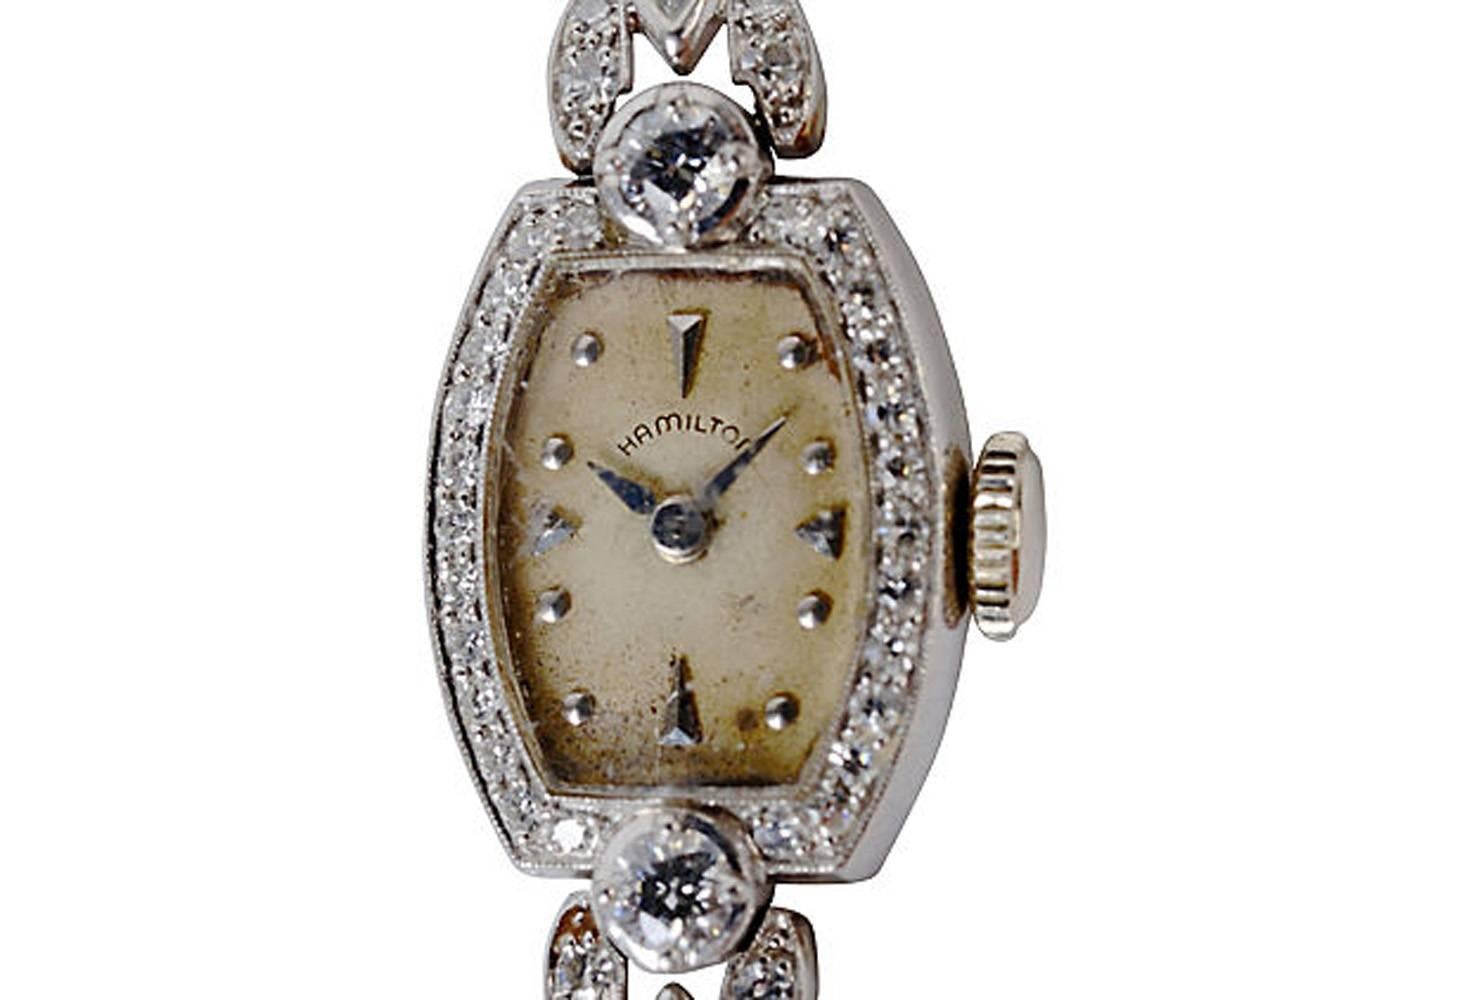 Late Retro Ladies Hamilton Platinum and Diamond Wristwatch, c1950 with assorted diamonds. Total diamond weight approximately 1.02 carats. The original 17 jewel movement housed in a engine-turned decorated case. Double locking anchor safety and